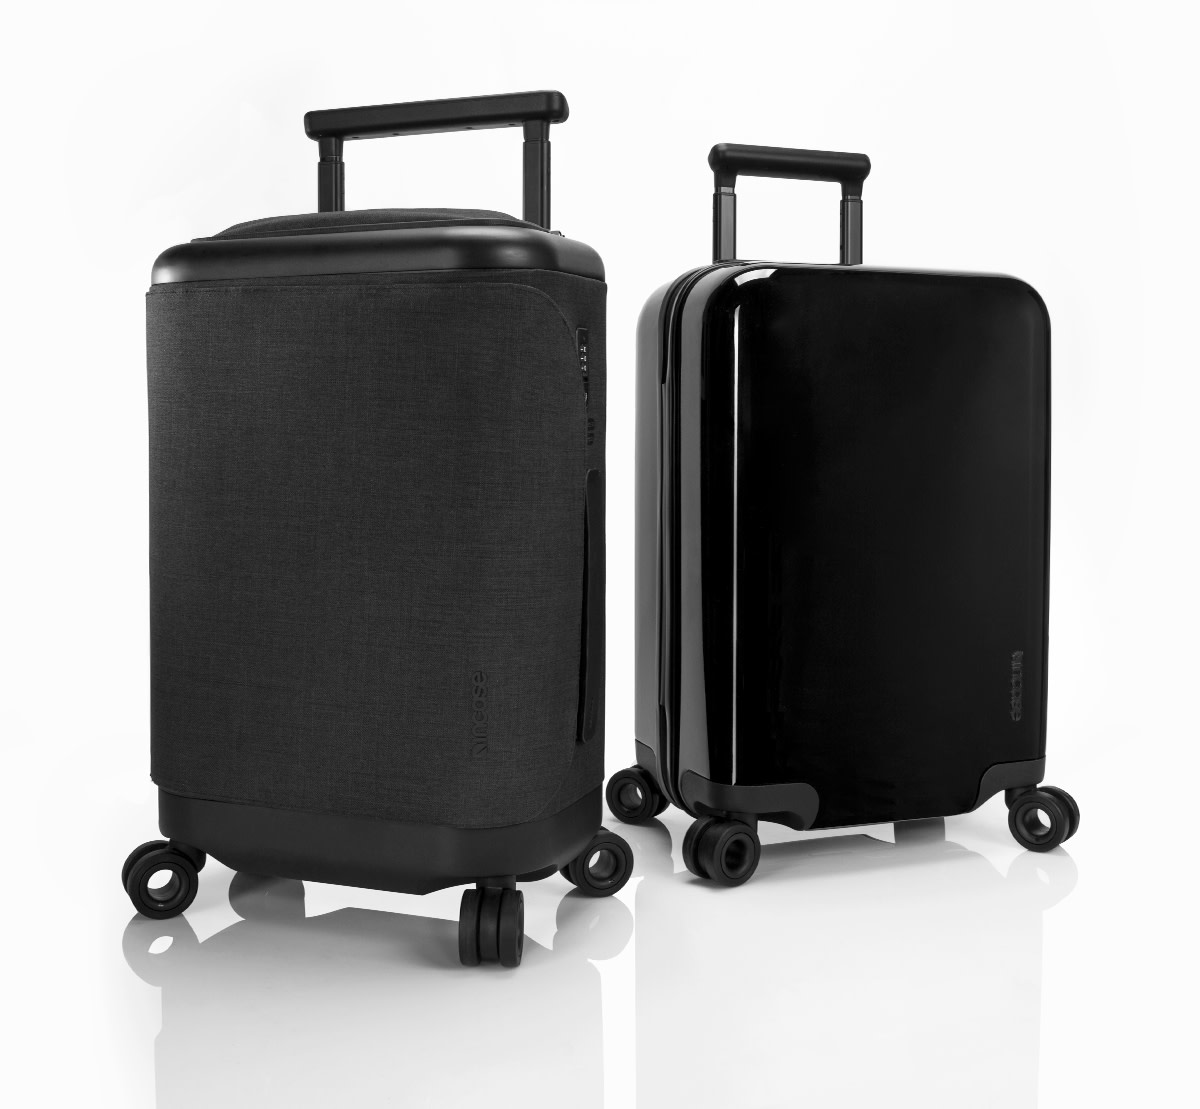 Incase Connected Luggage